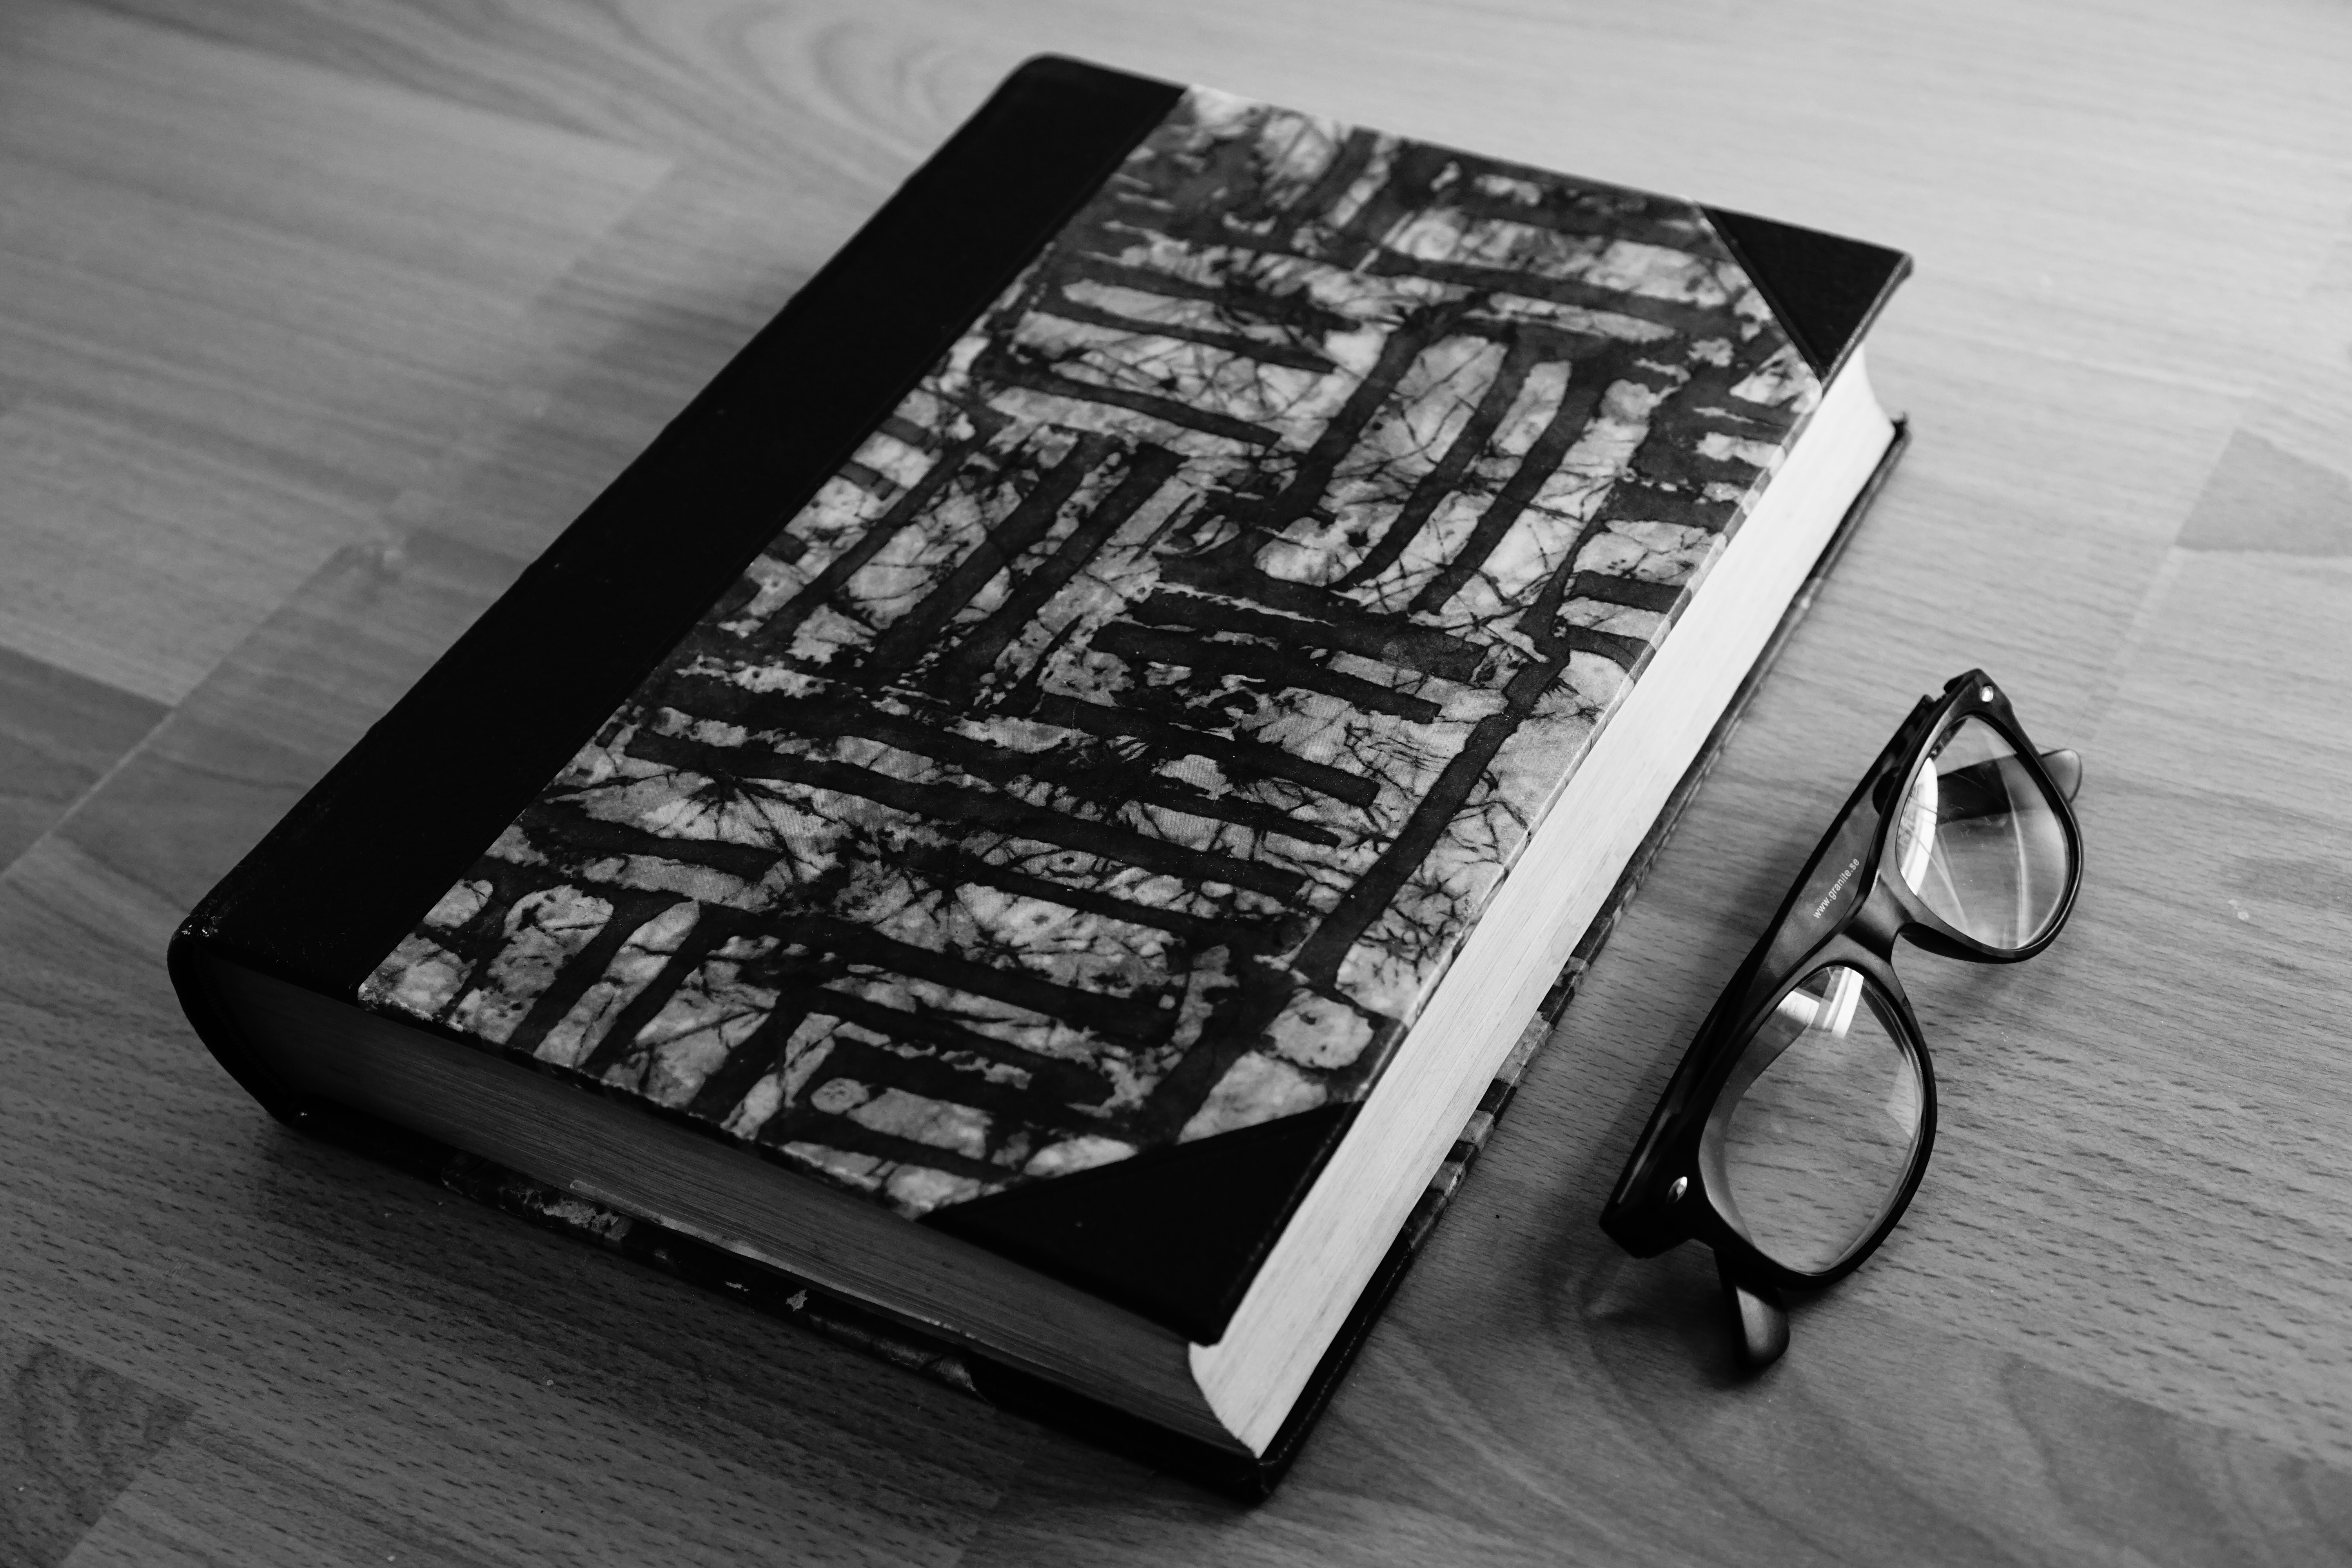 Grayscale photo of eyeglasses near thickbound book